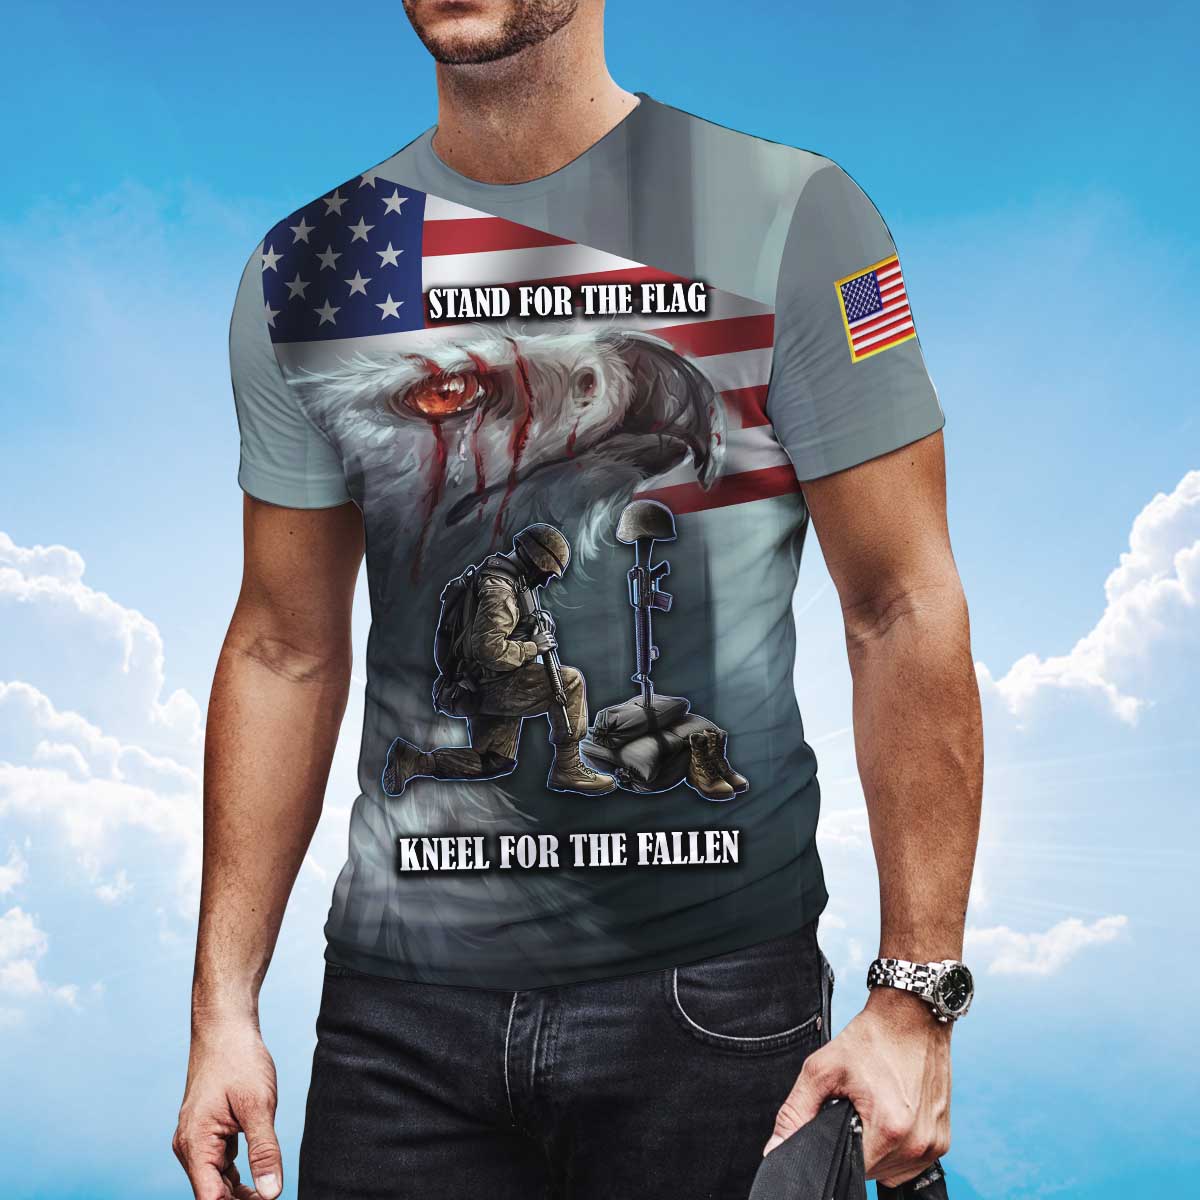 Stand For The Flag T Shirt Kneel For The Fallen Memorial 11 Sep Shirt